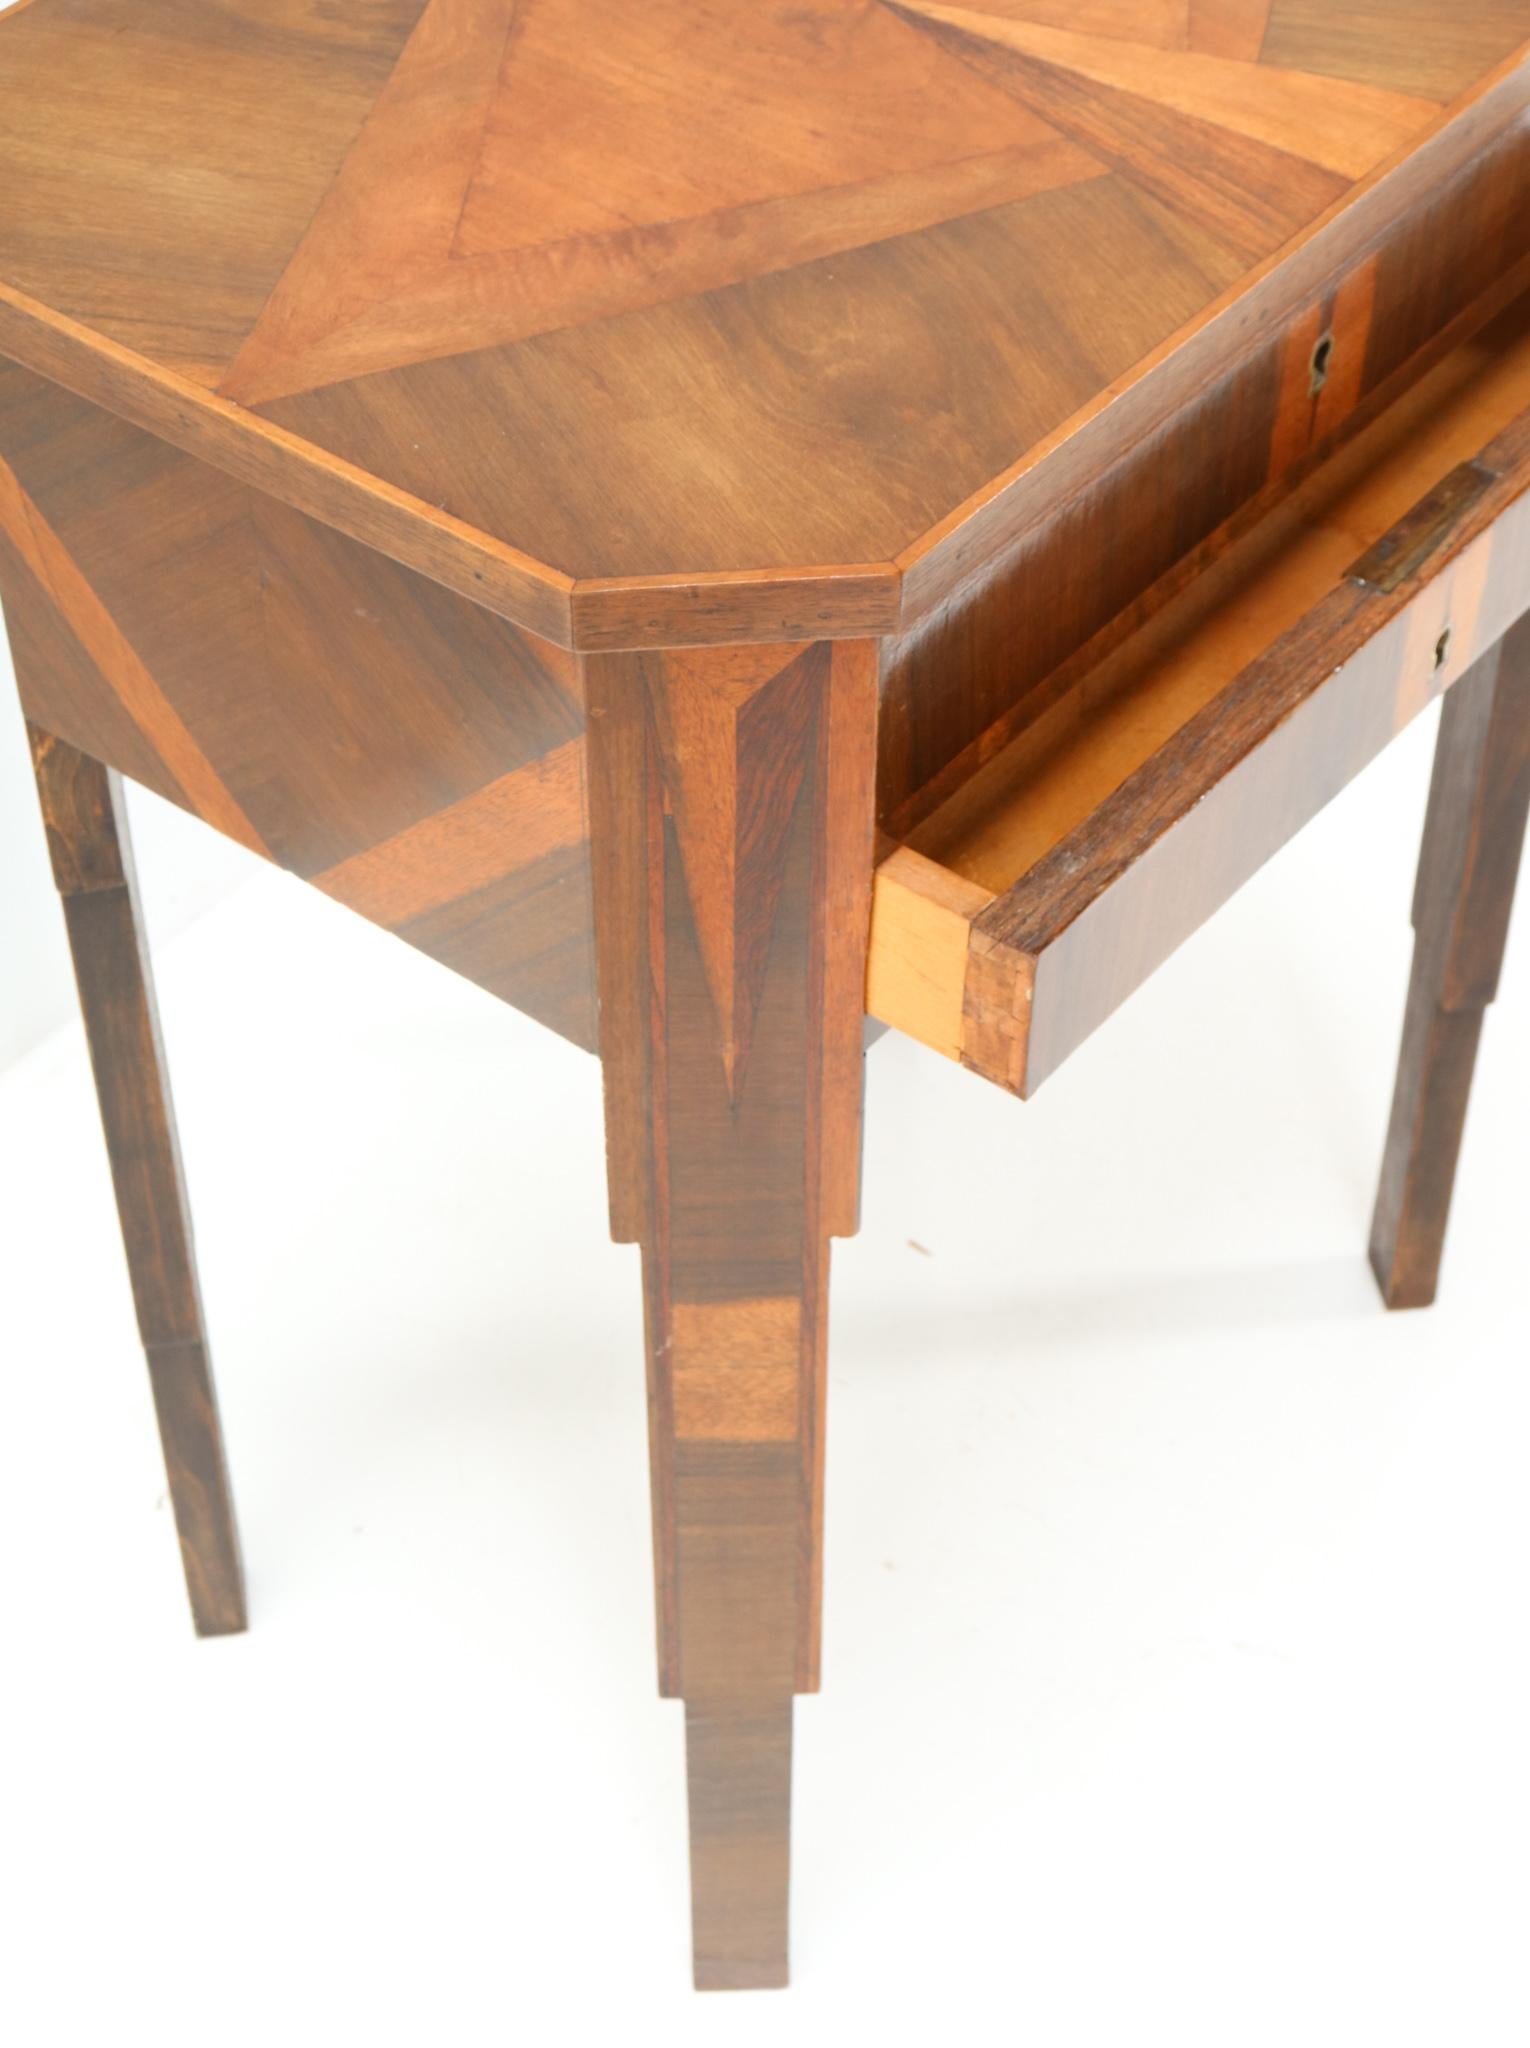 French Walnut Art Deco Sewing Table with Inlay, 1930s For Sale 4